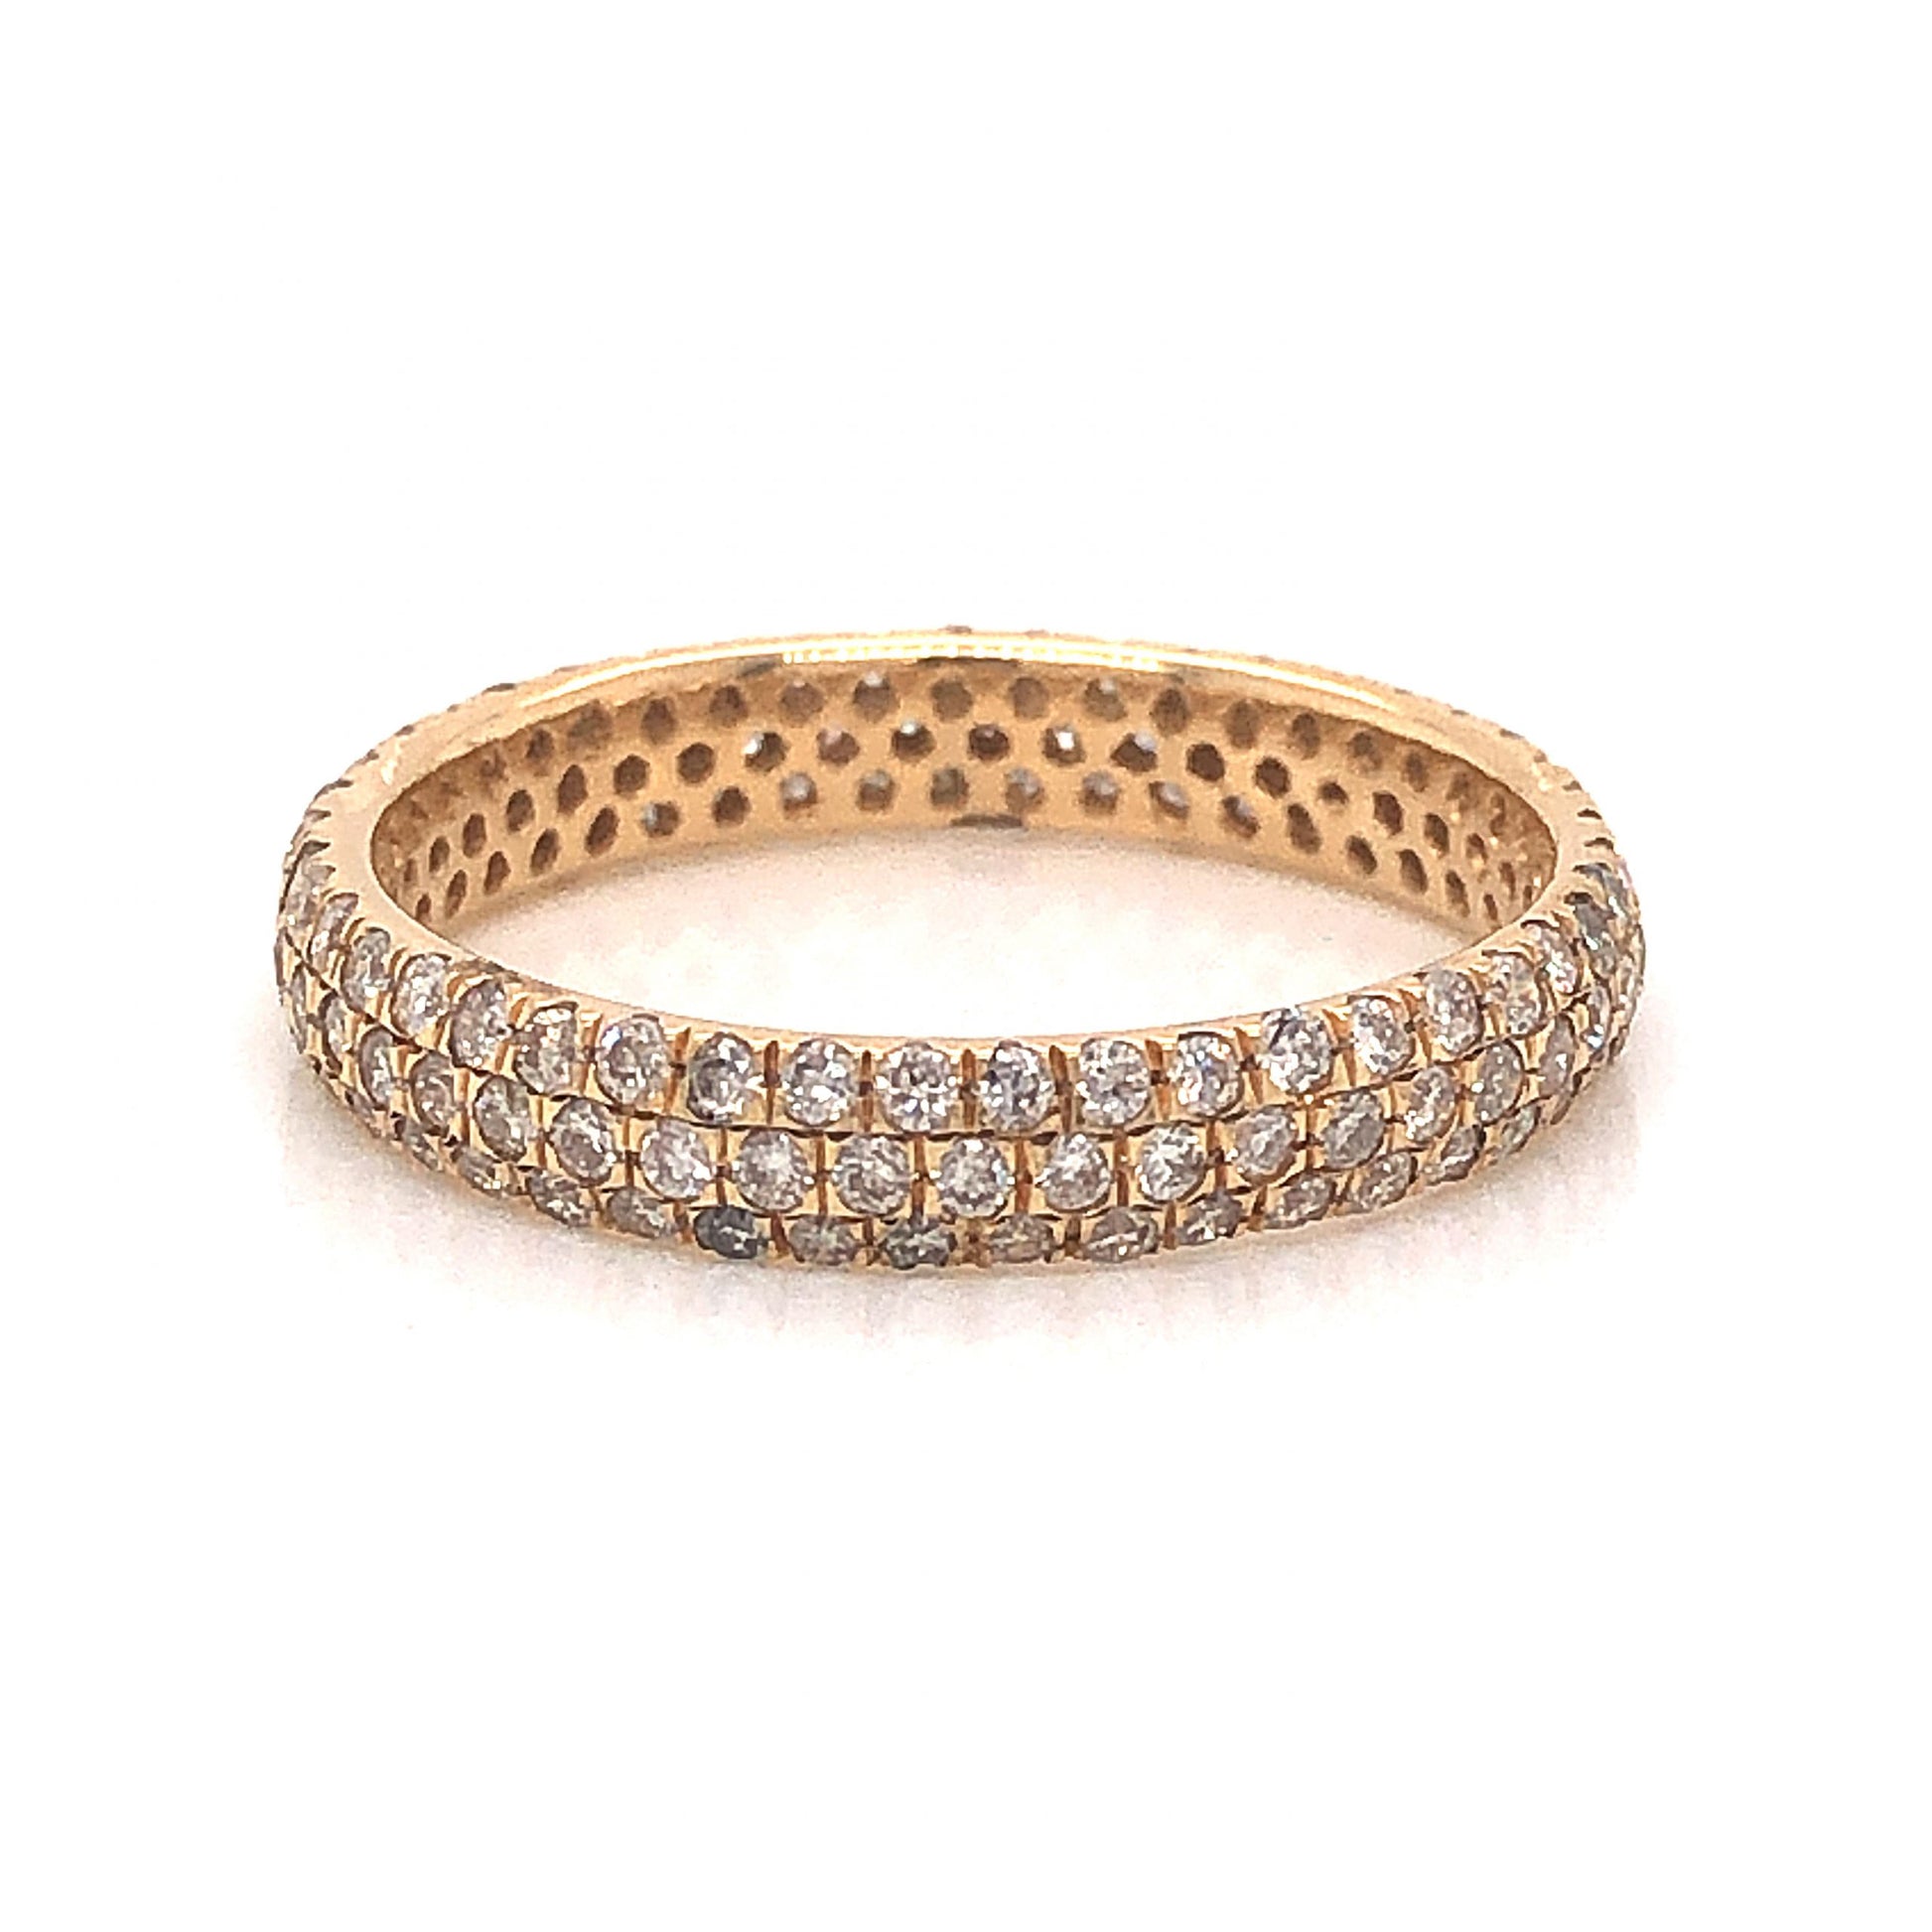 Pave Diamond Eternity Band in 14k Yellow GoldComposition: 14 Karat Yellow GoldRing Size: 7Total Diamond Weight: .88 ctTotal Gram Weight: 1.9 g